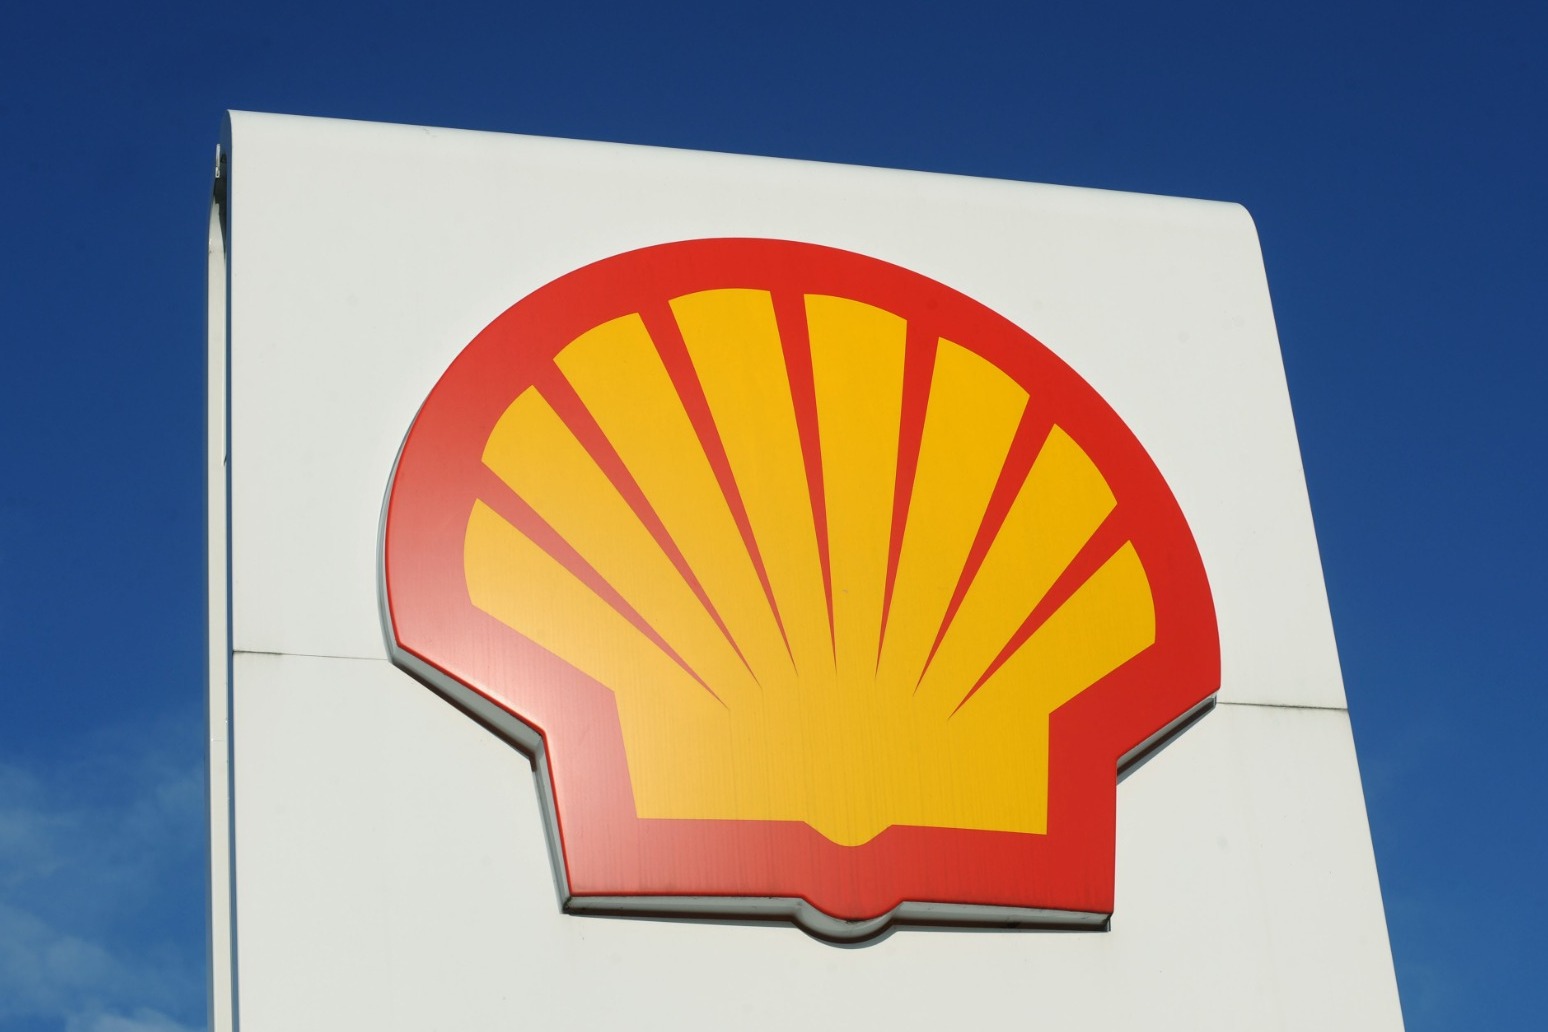 Shell more than doubles third quarter profit to £8.2 billion but oil price falls 